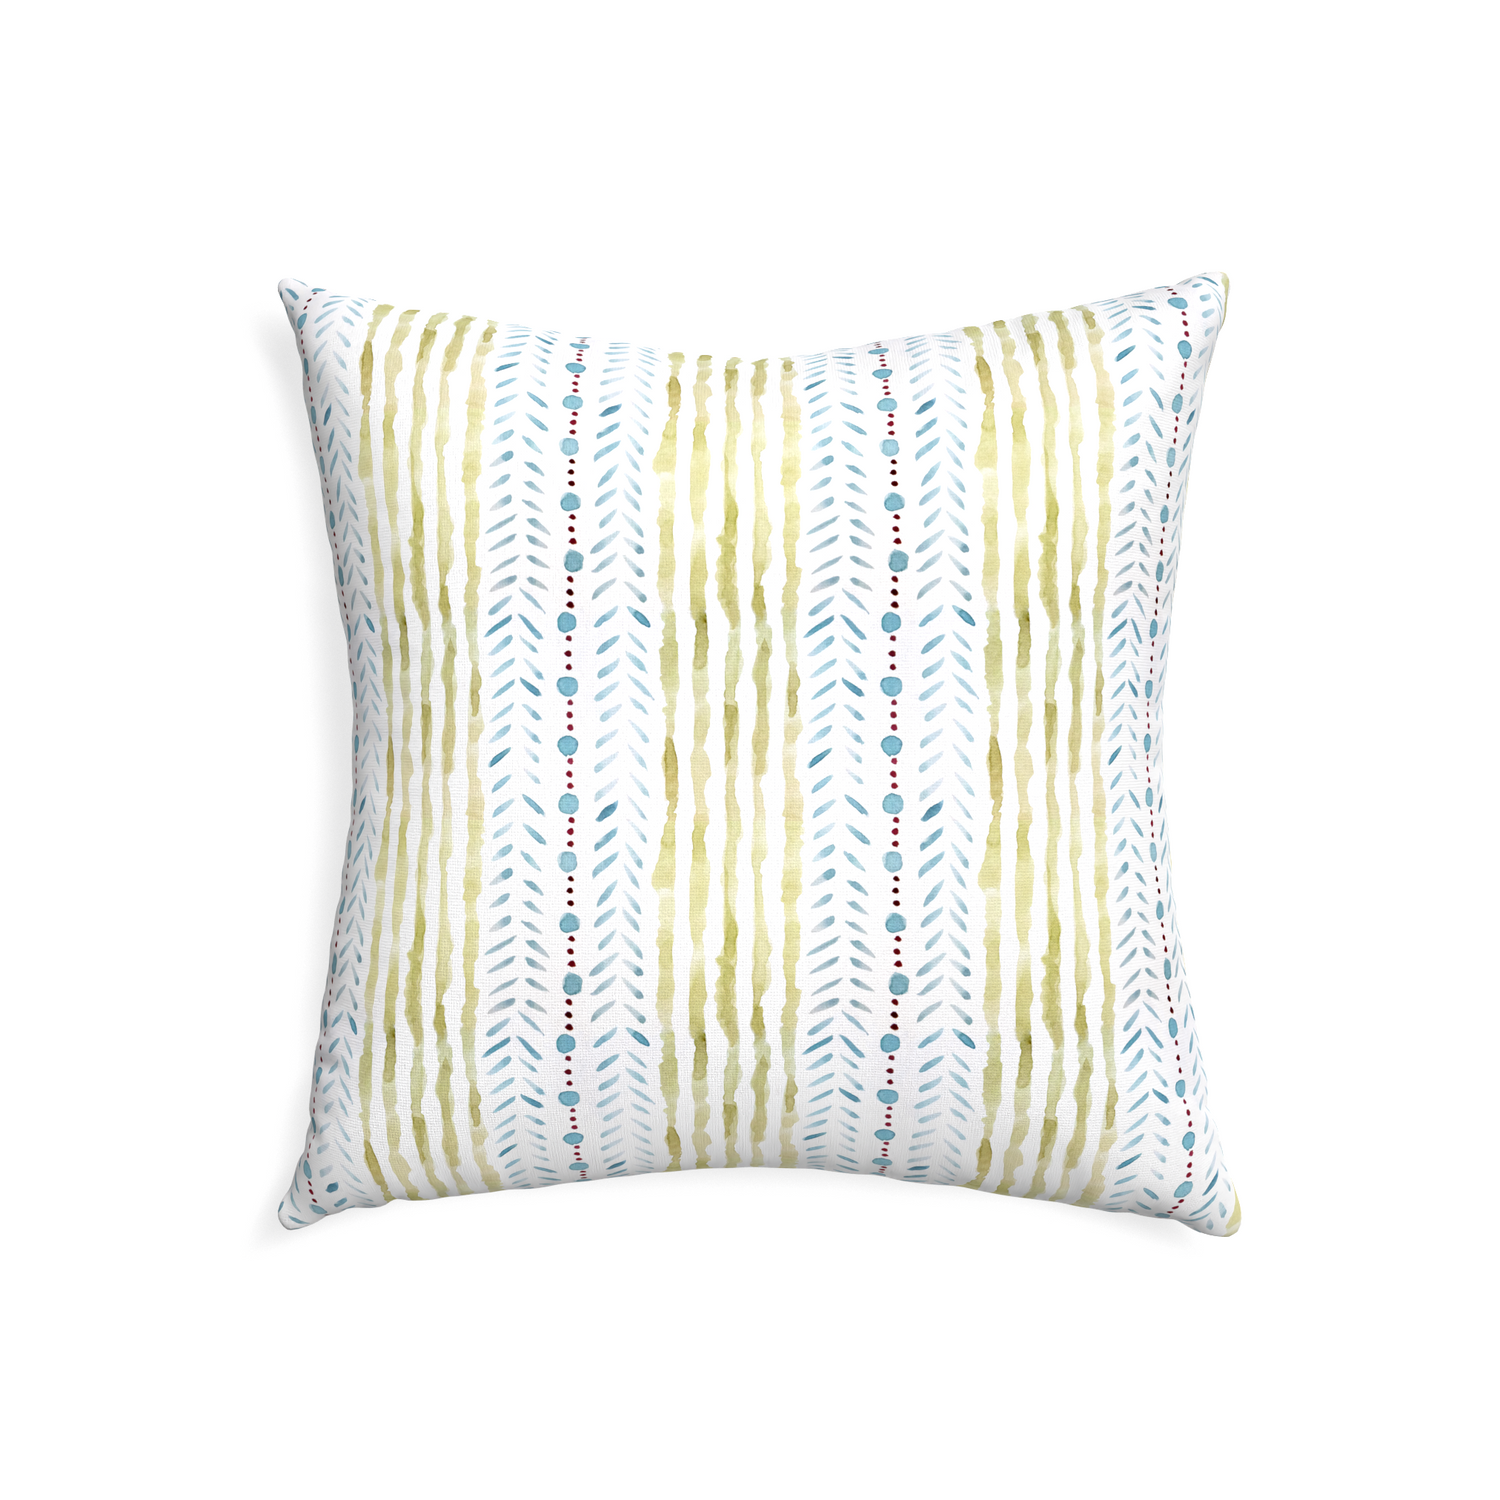 22-square julia custom pillow with none on white background